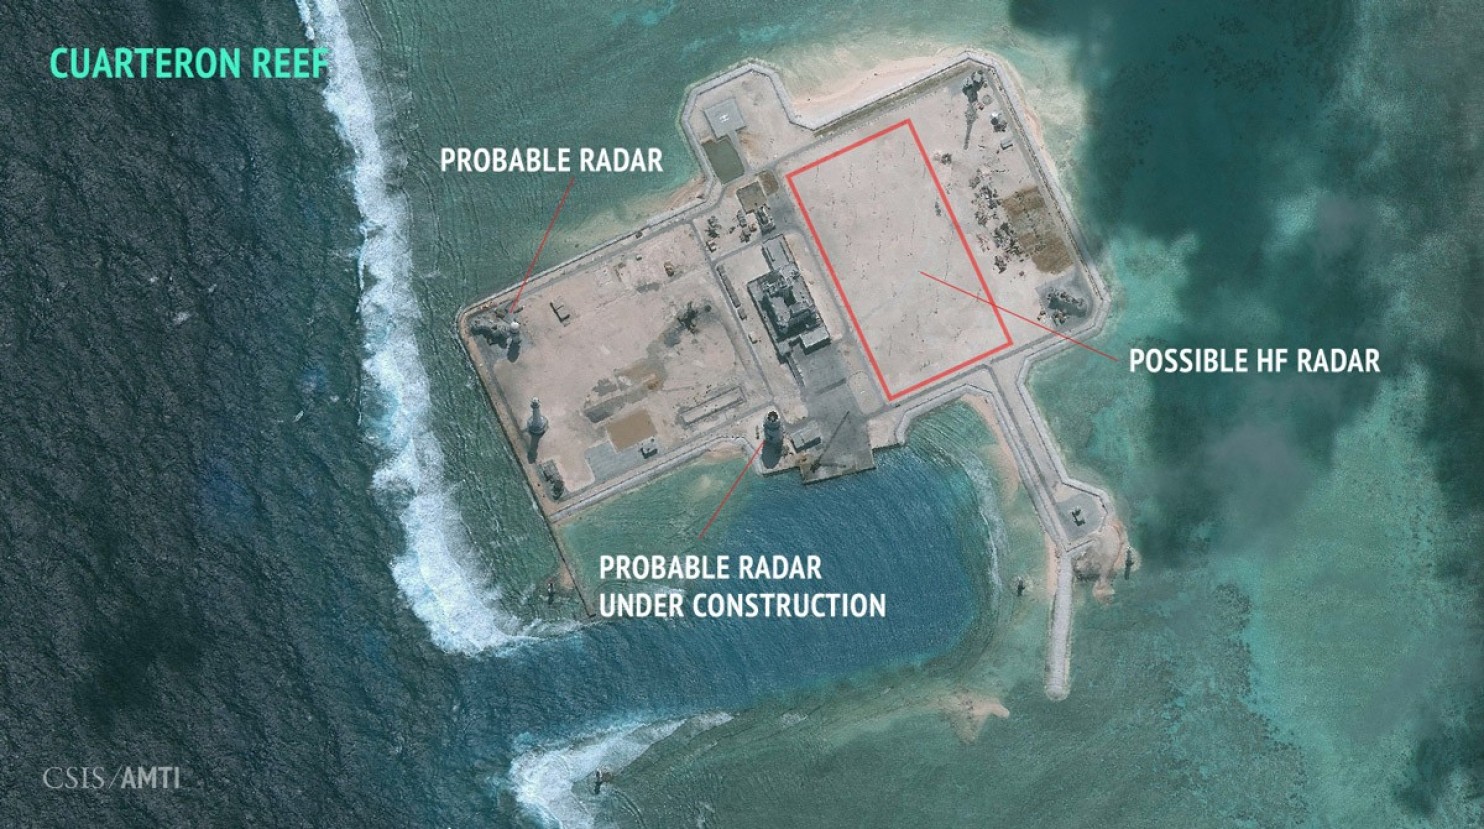 A Jan. 24, 2016 image of Cuarteron Reef in the South China Sea with what is likely a high frequency radar array. CSIS Asian Maritime Transparency Initiative, DigitalGlobe Image used with permission.